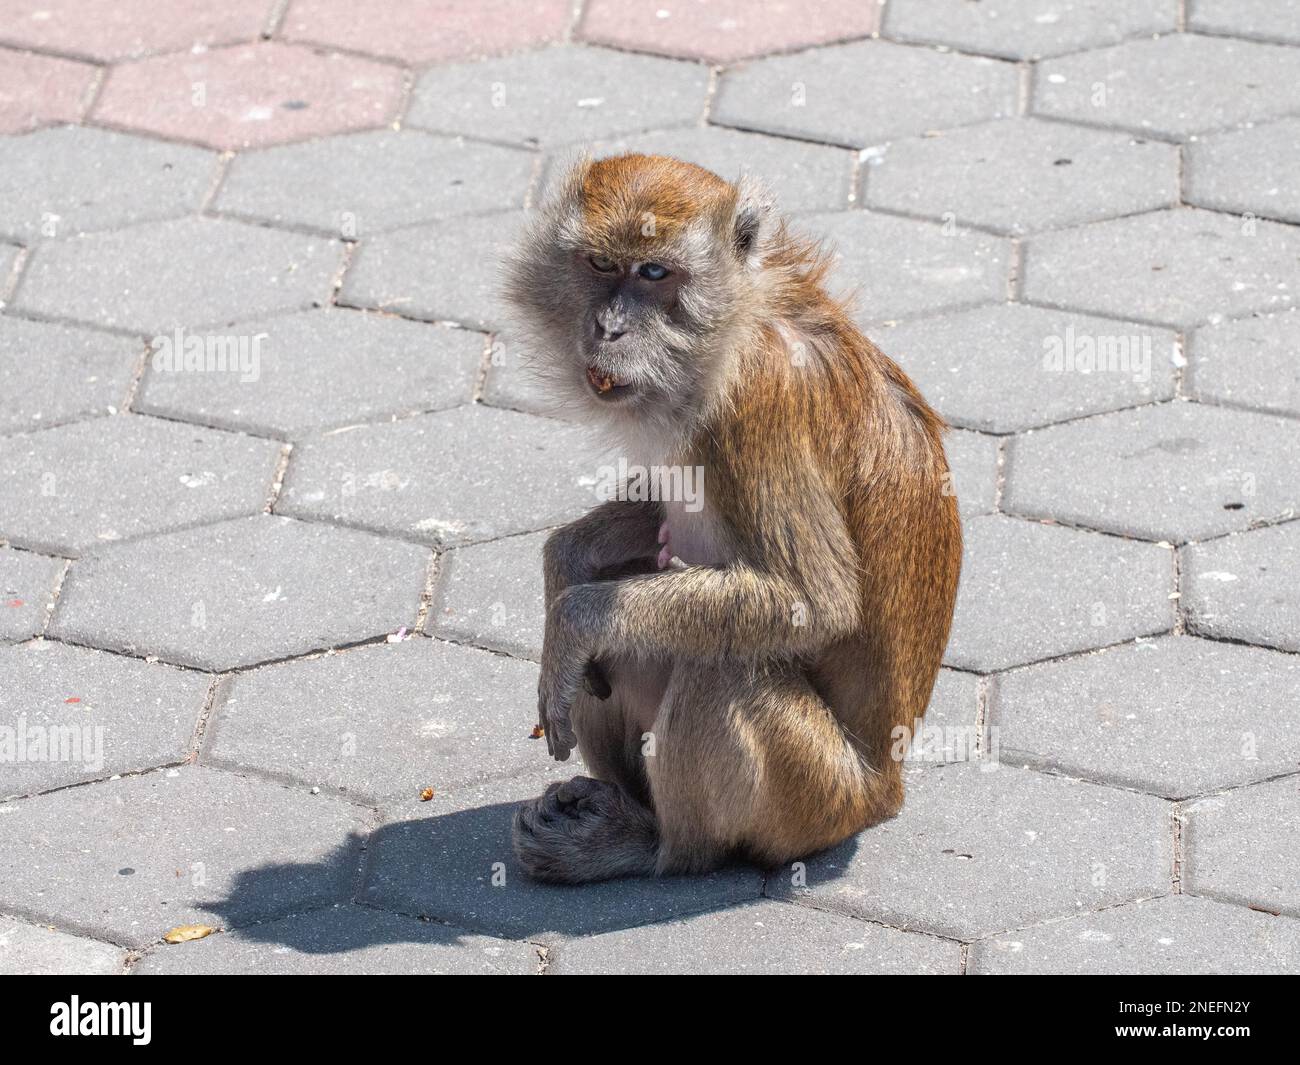 A monkey with an ugly expression at Batu Caves. Stock Photo